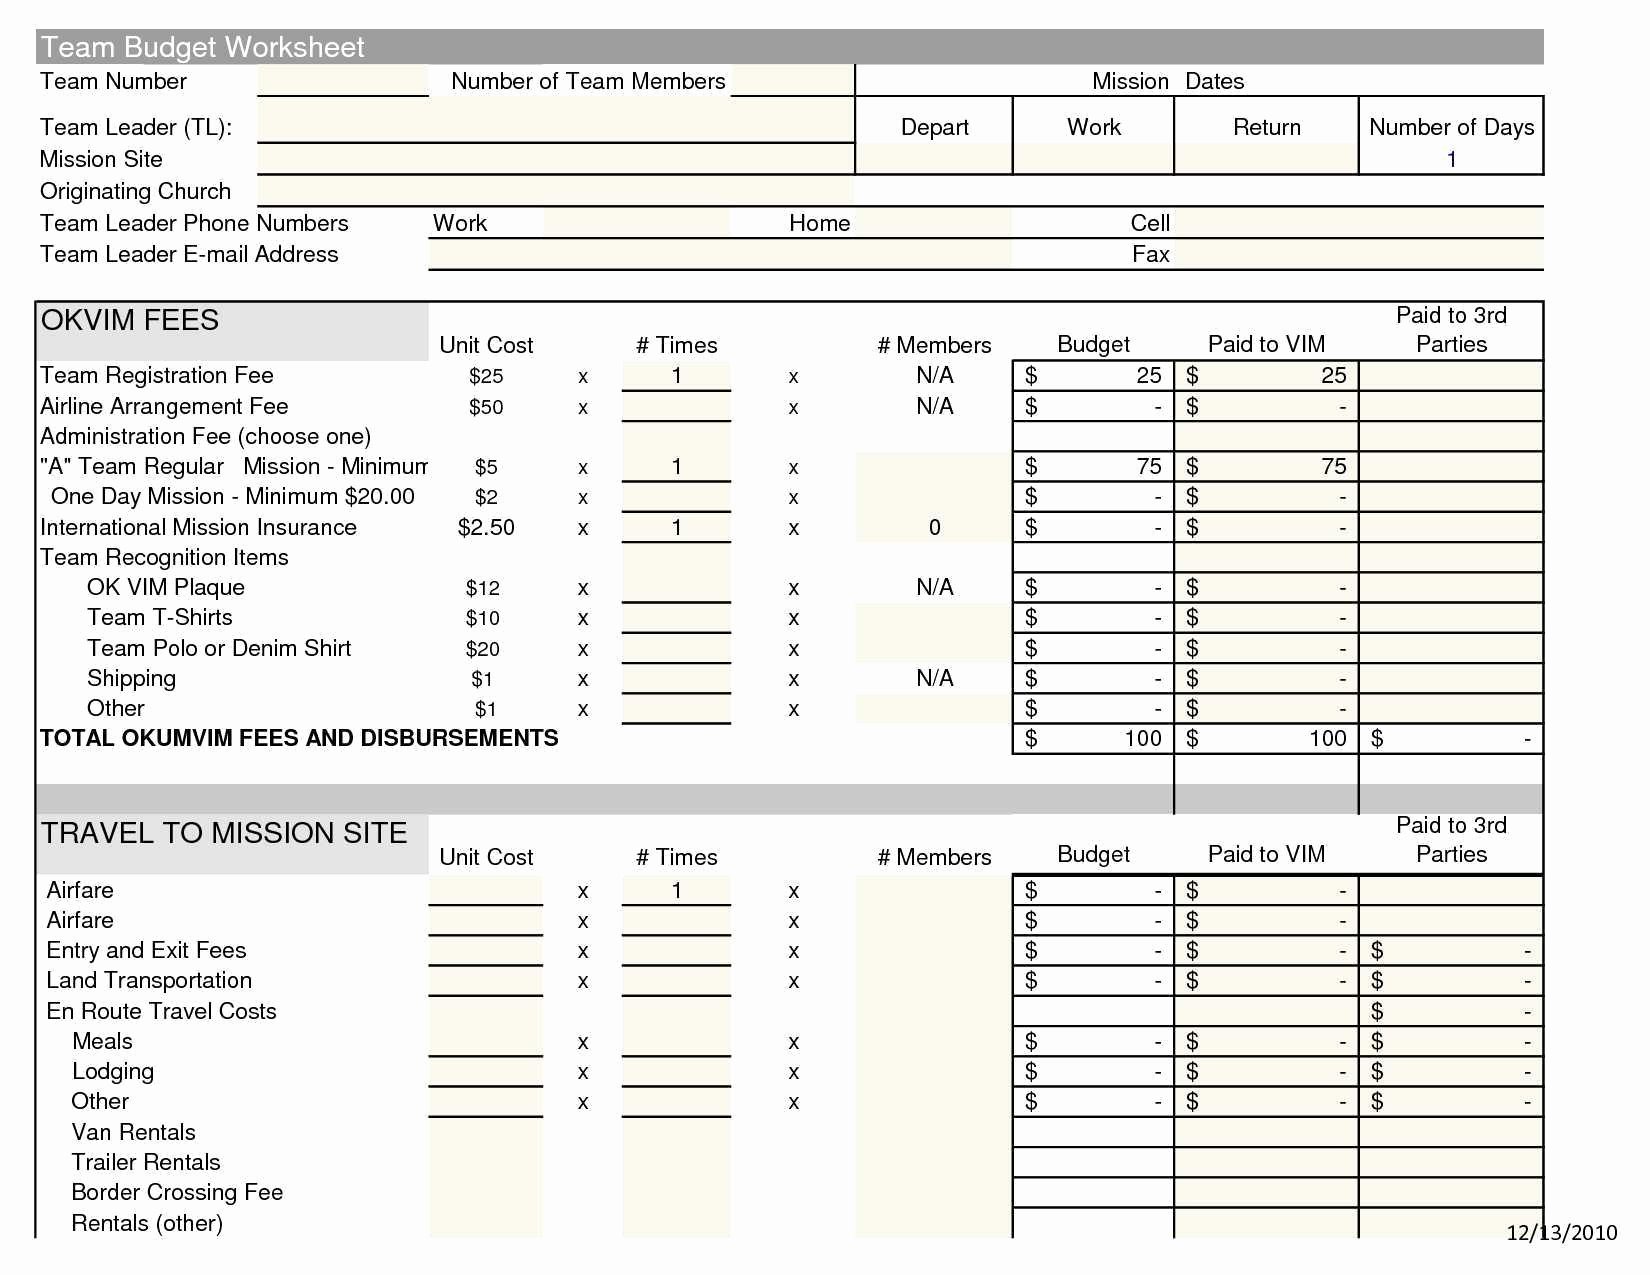 Balance Sheet Reconciliation Template Awesome Balance Sheet Account Reconciliation Template Excel